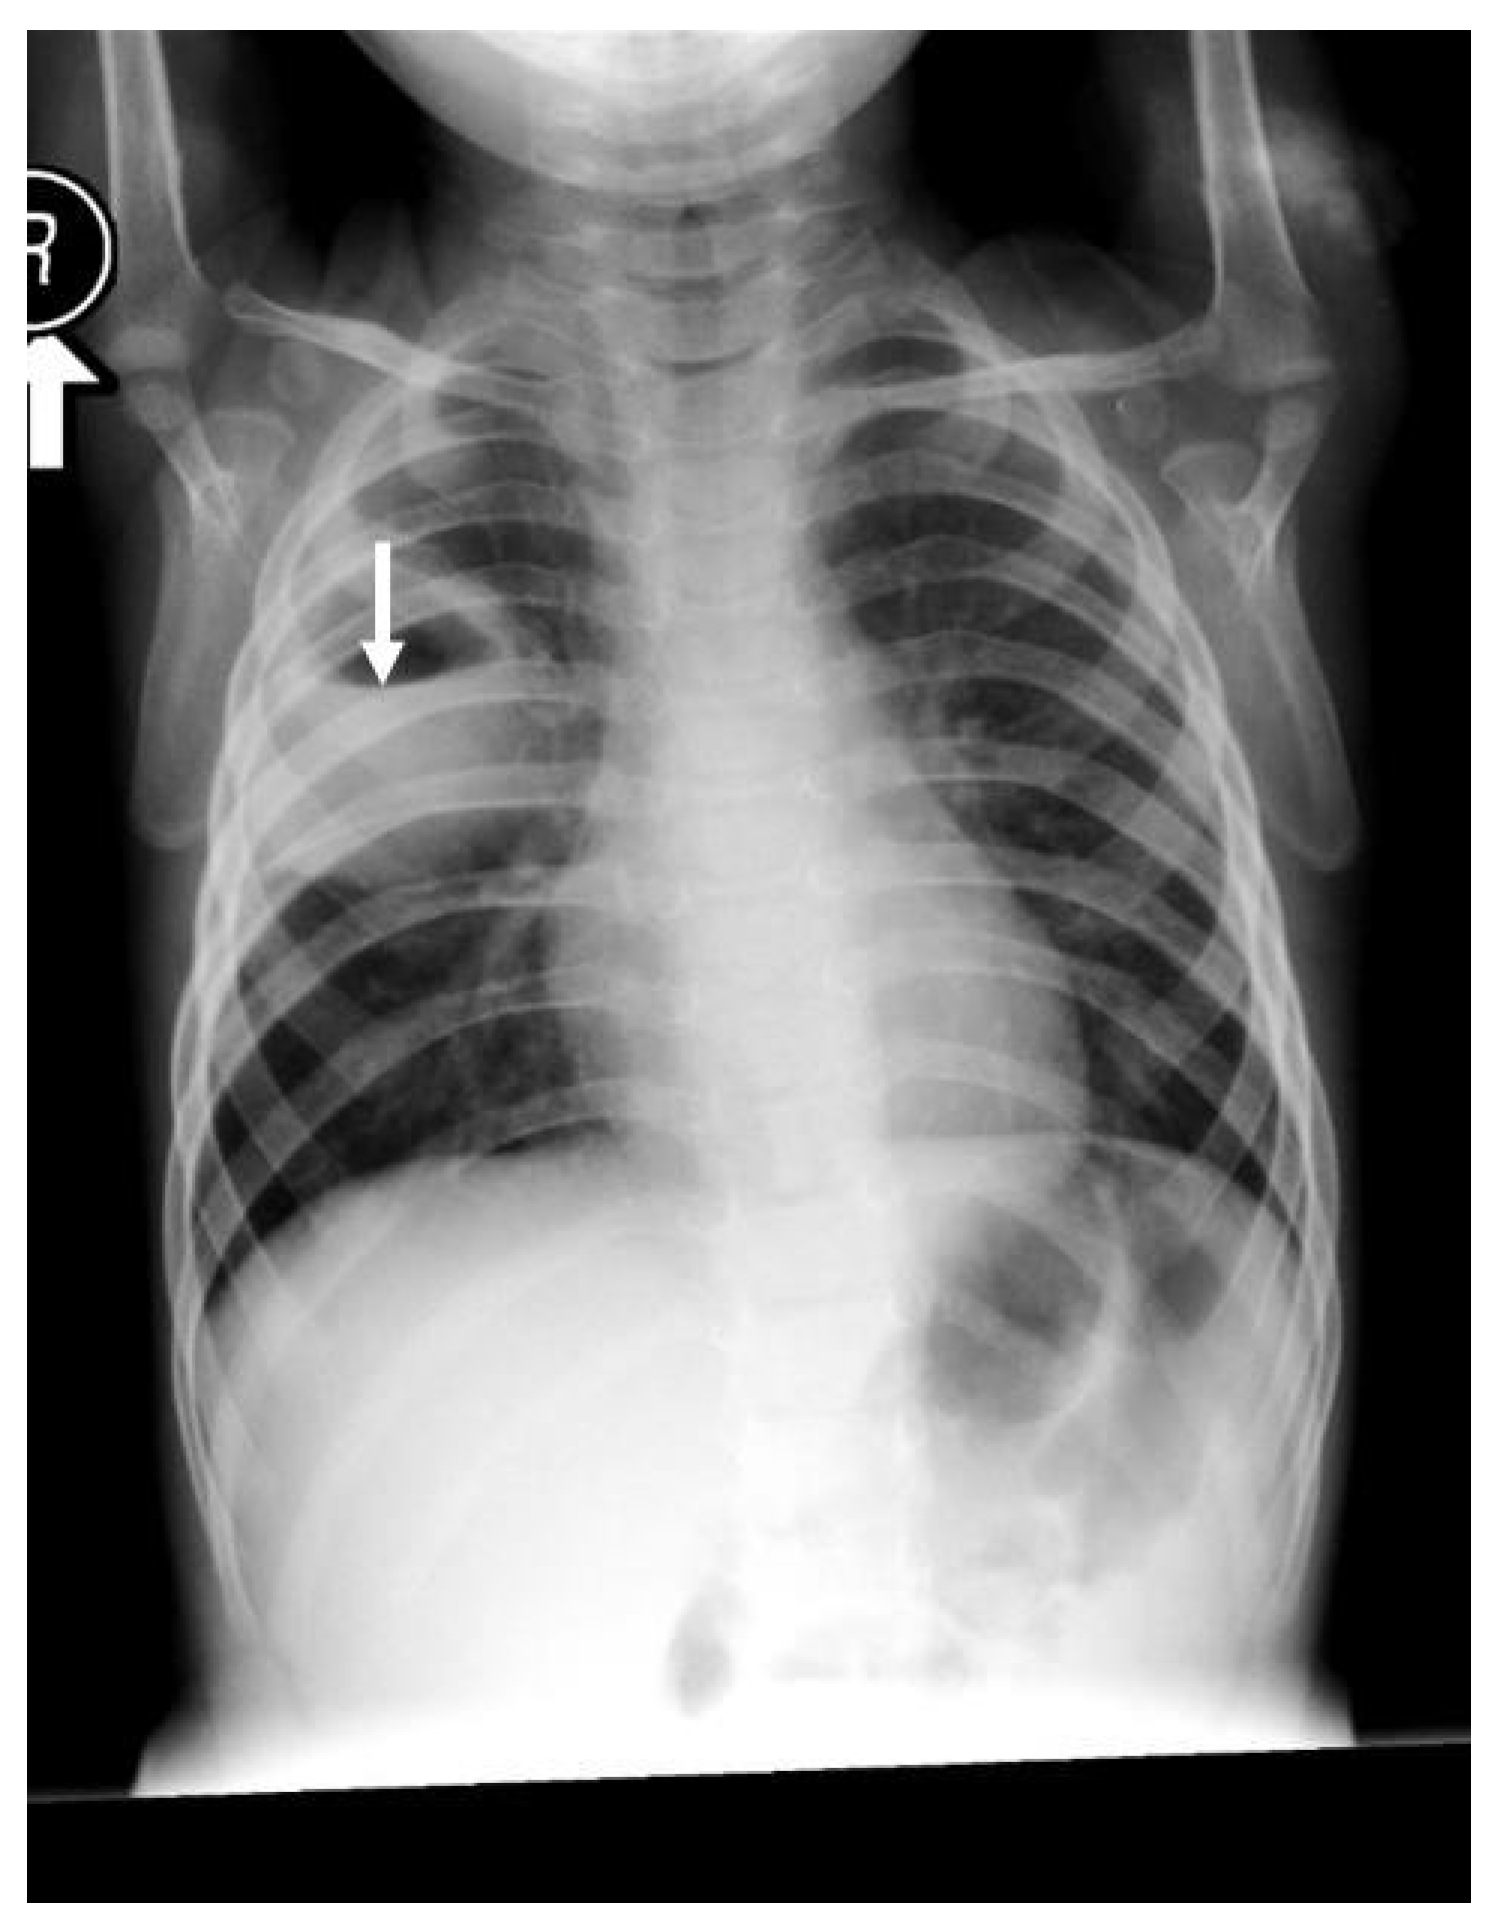 lung abscess x ray